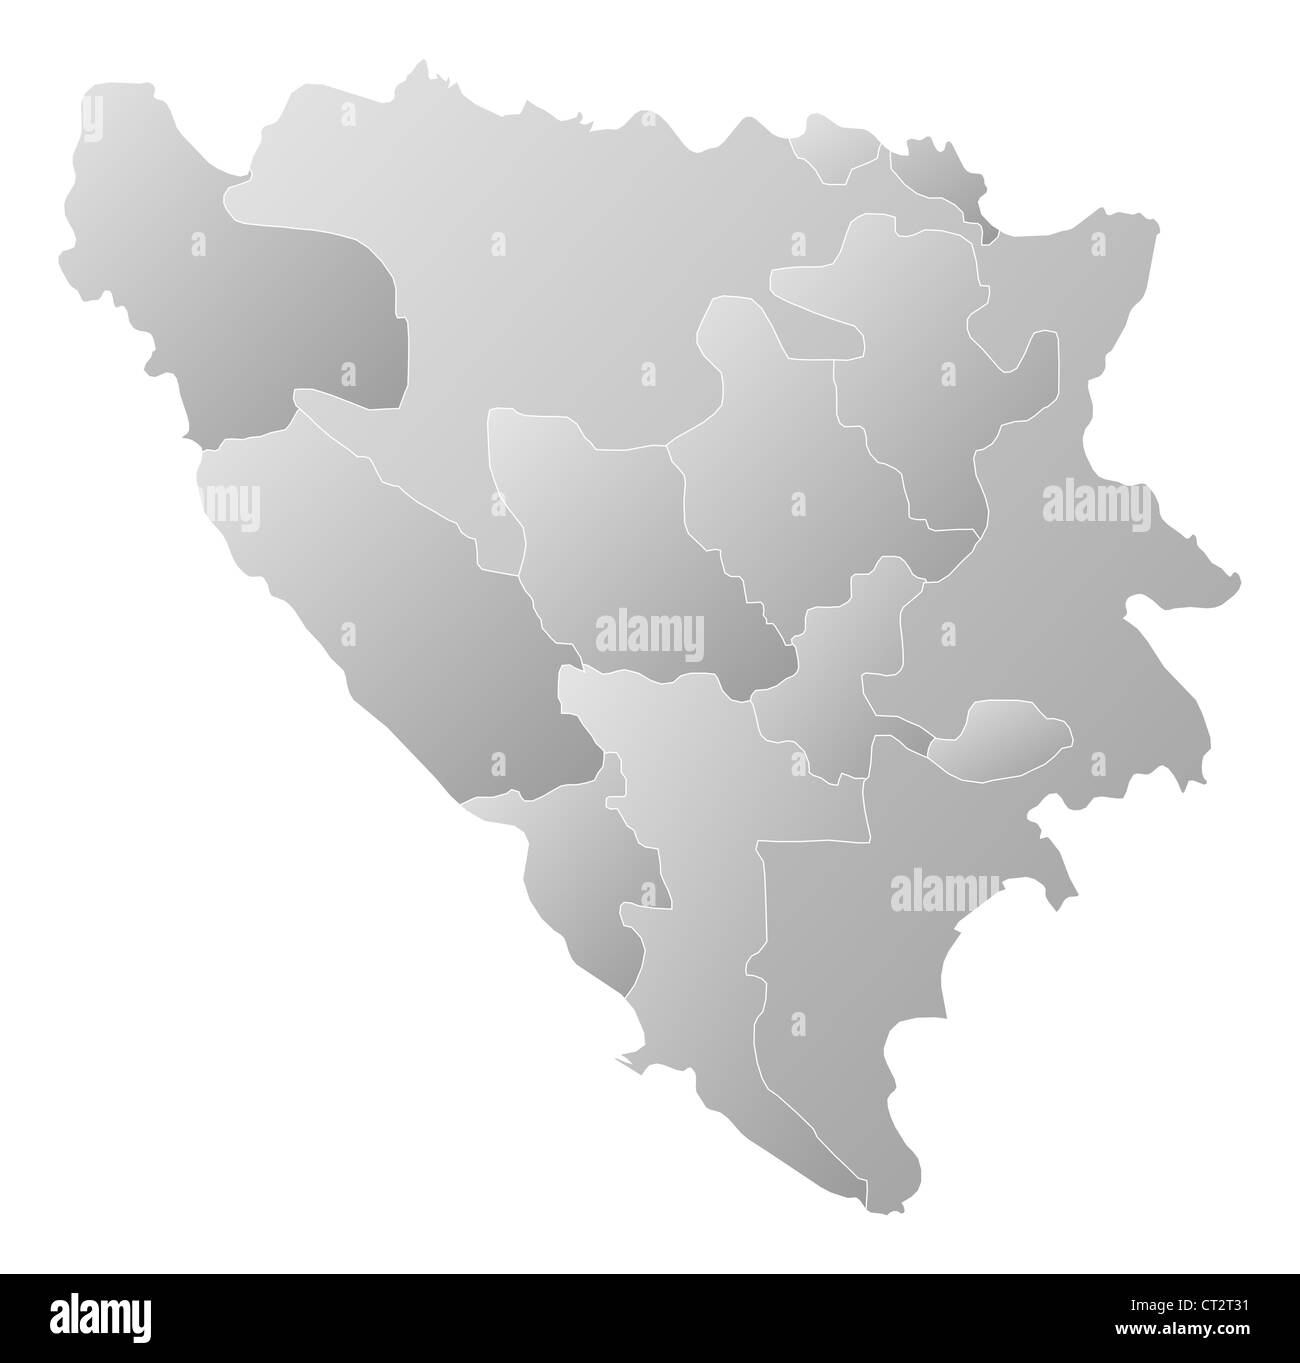 Political map of Bosnia and Herzegovina with the several cantons. Stock Photo